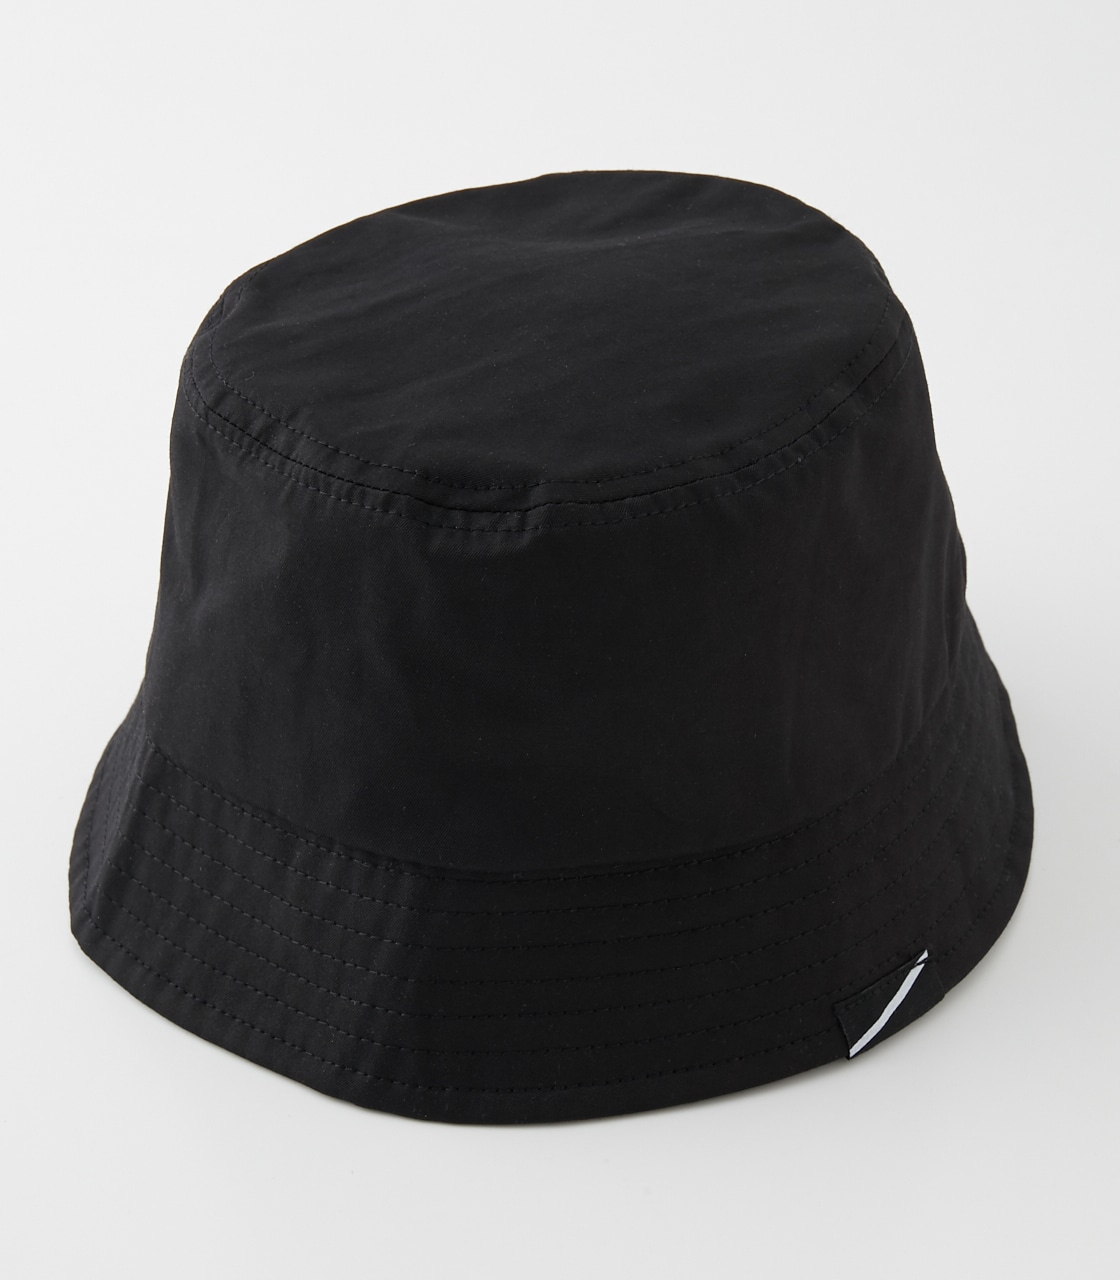 COMPACT DEEPLY BUCKET HAT/コンパクトディープリーバケットハット 詳細画像 BLK 1